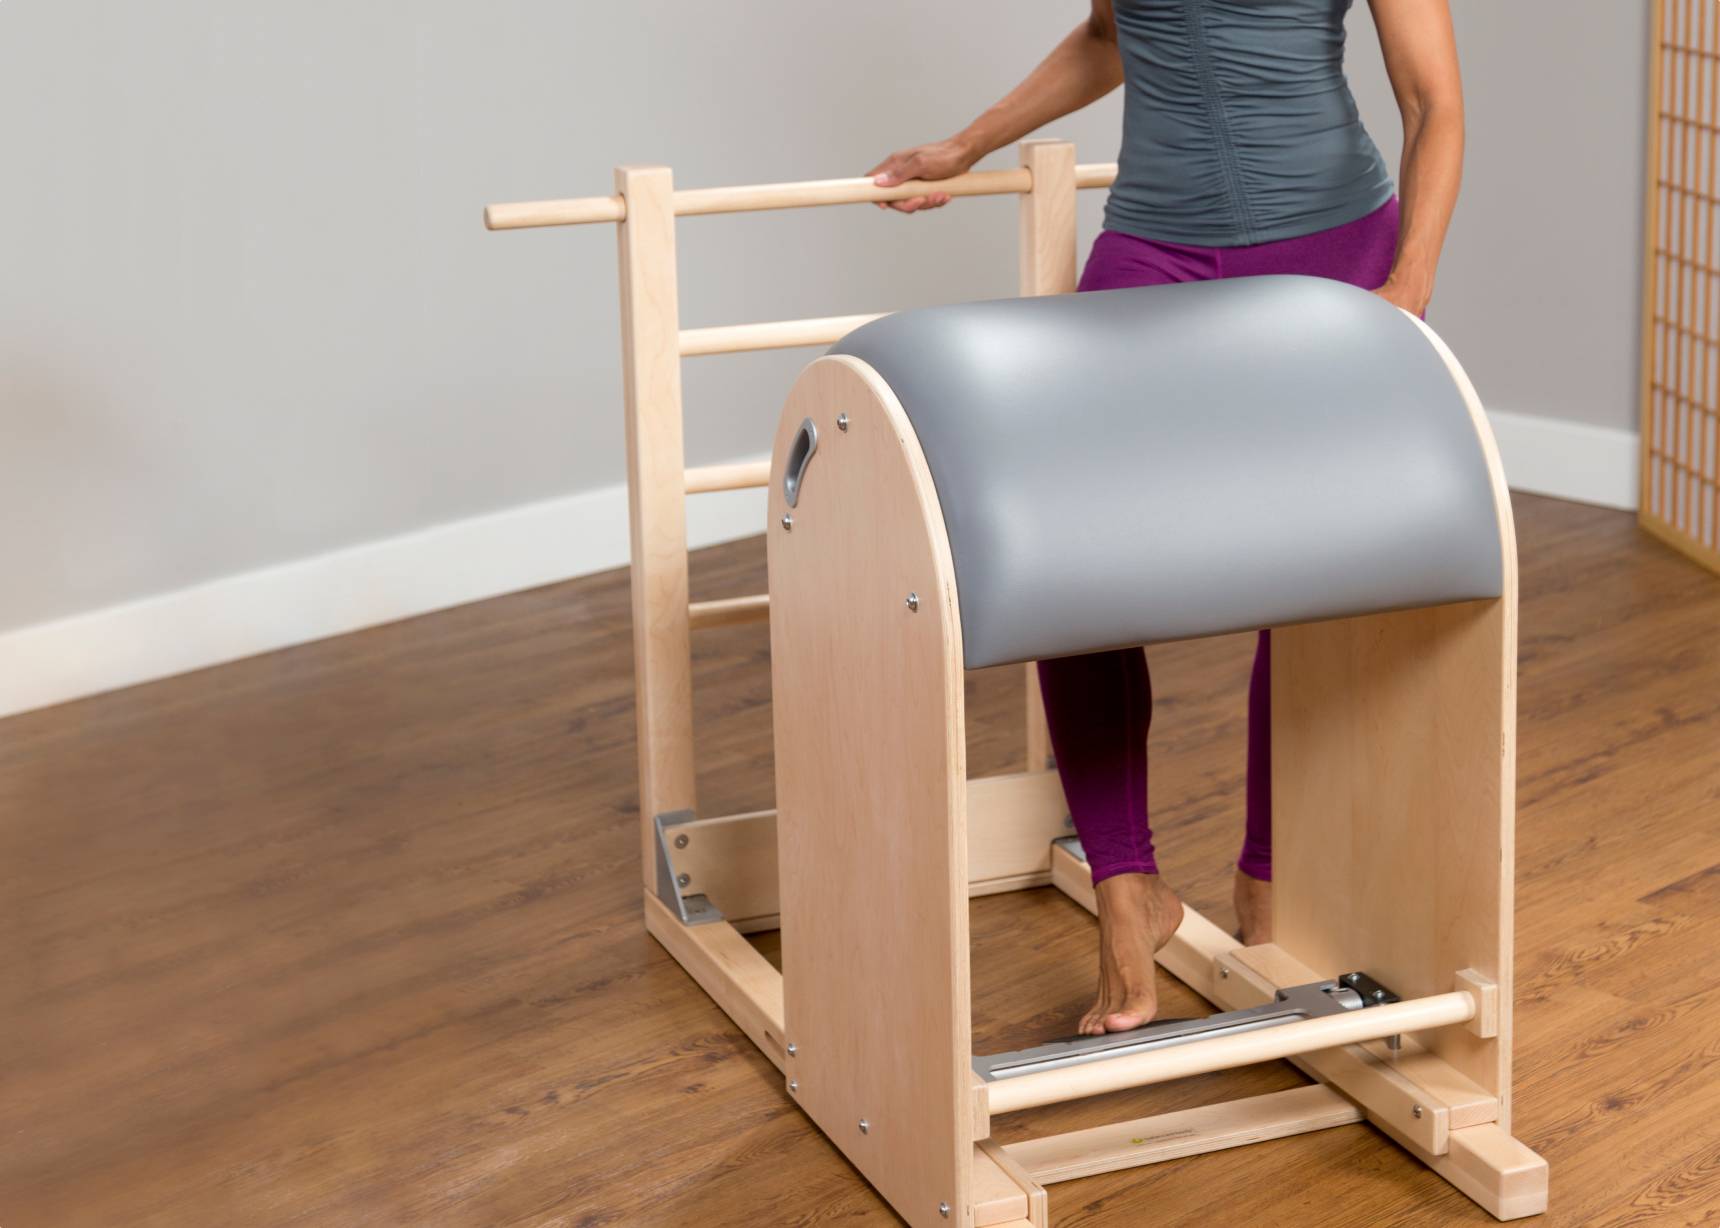 Do it yourself! How to make your own Pilates Ladder Barrel